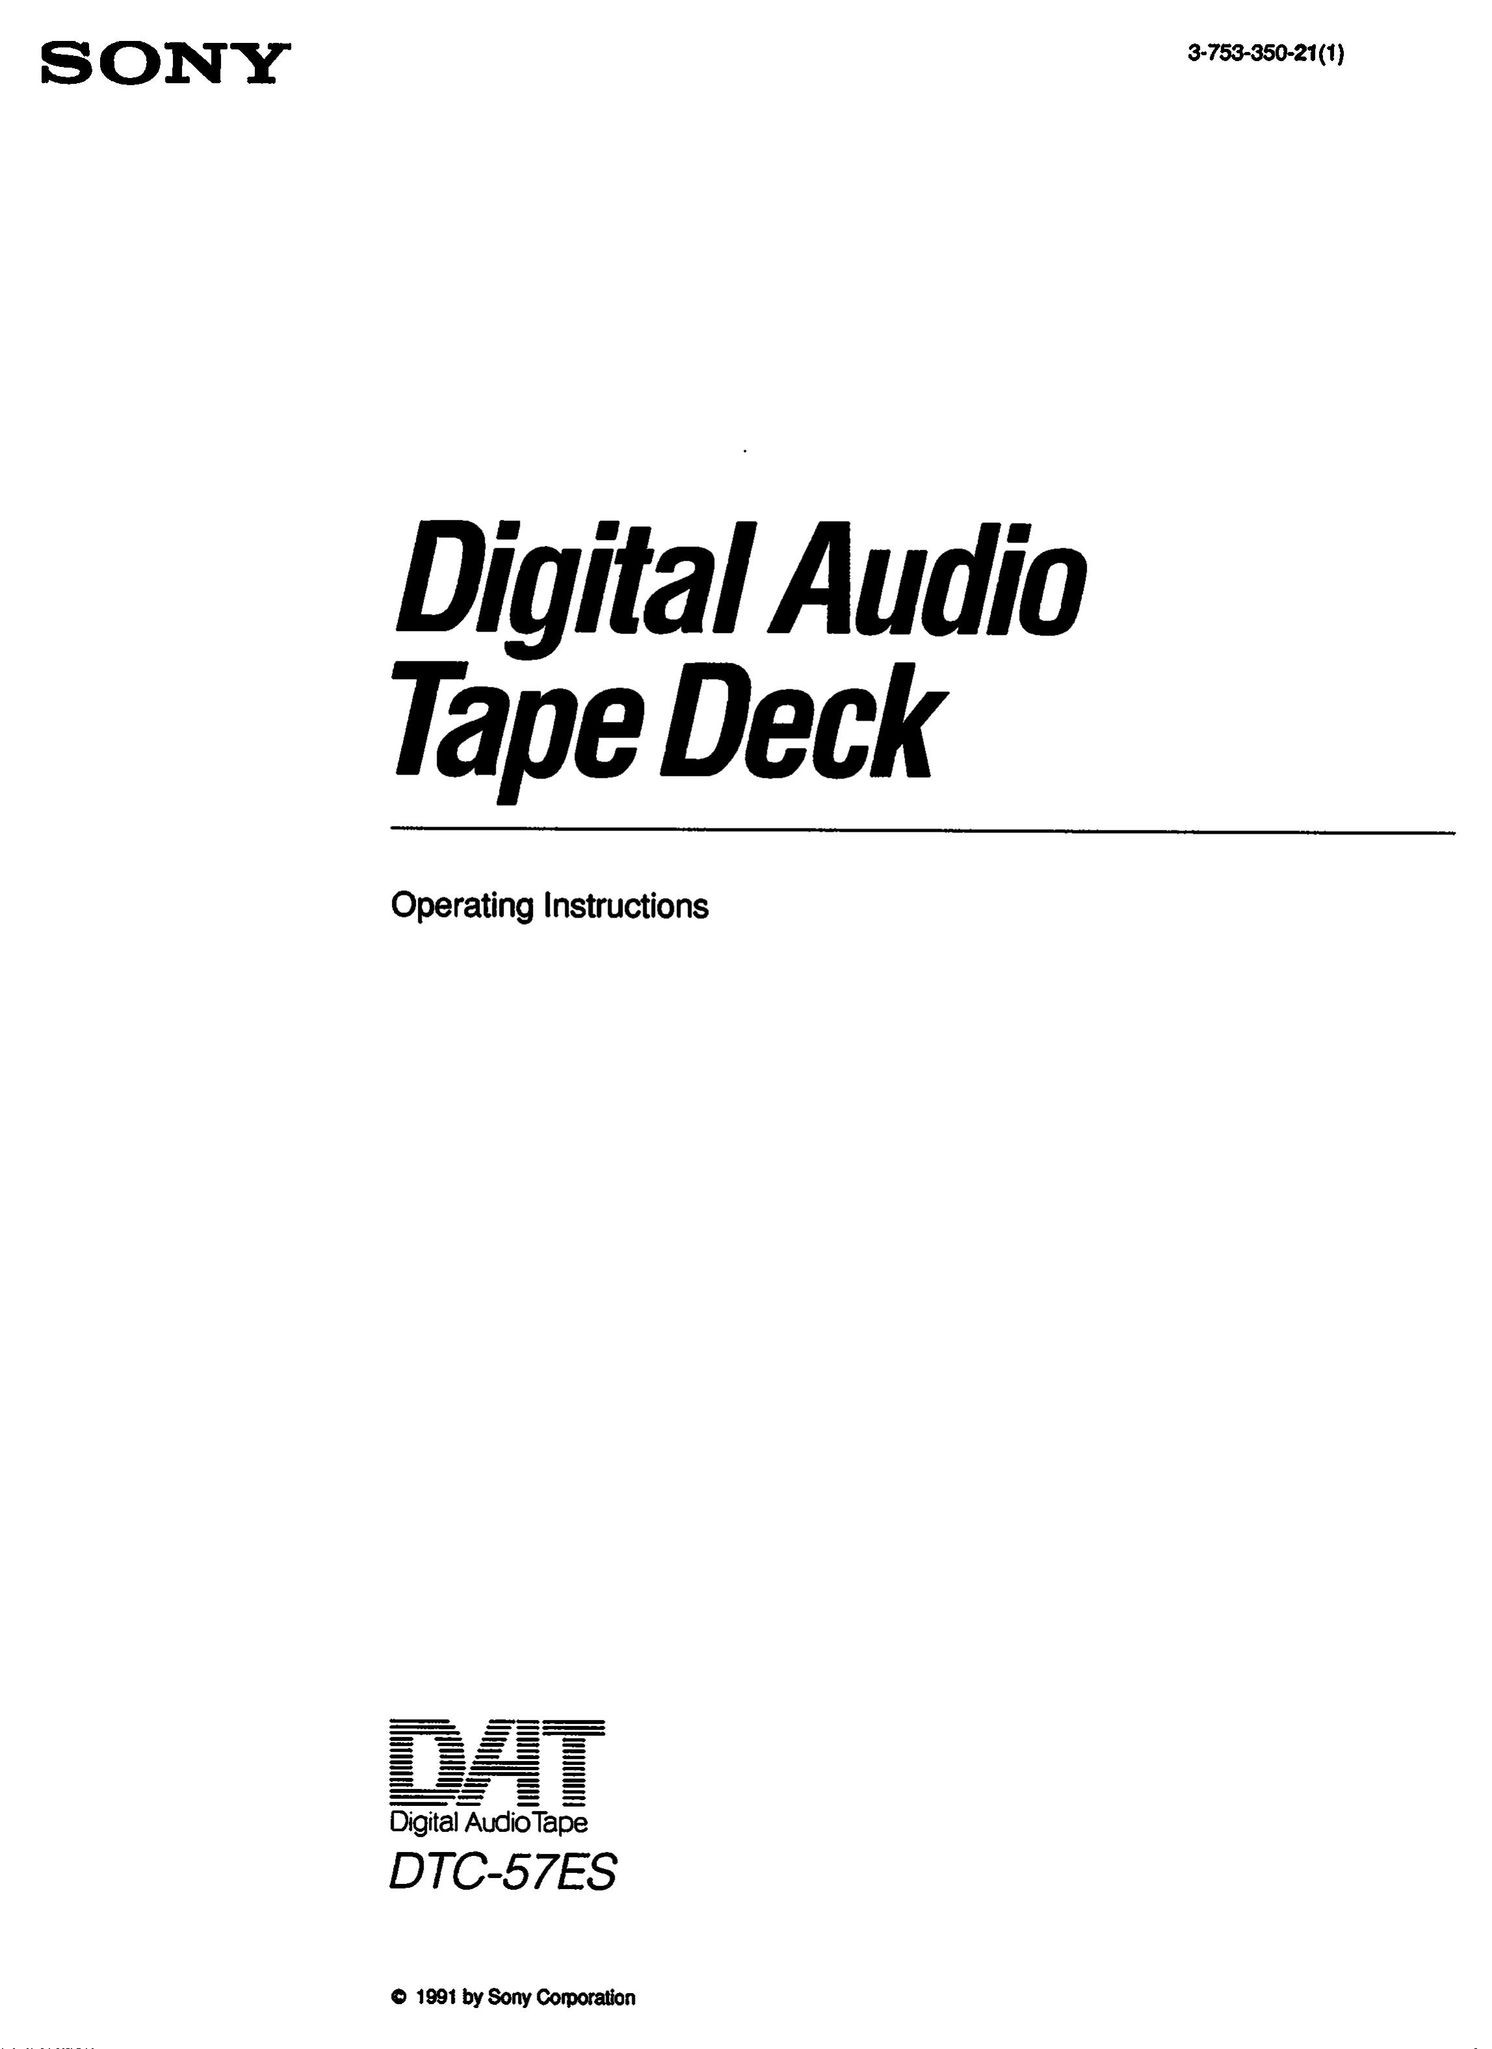 Sony DTC-57ES Microcassette Recorder User Manual